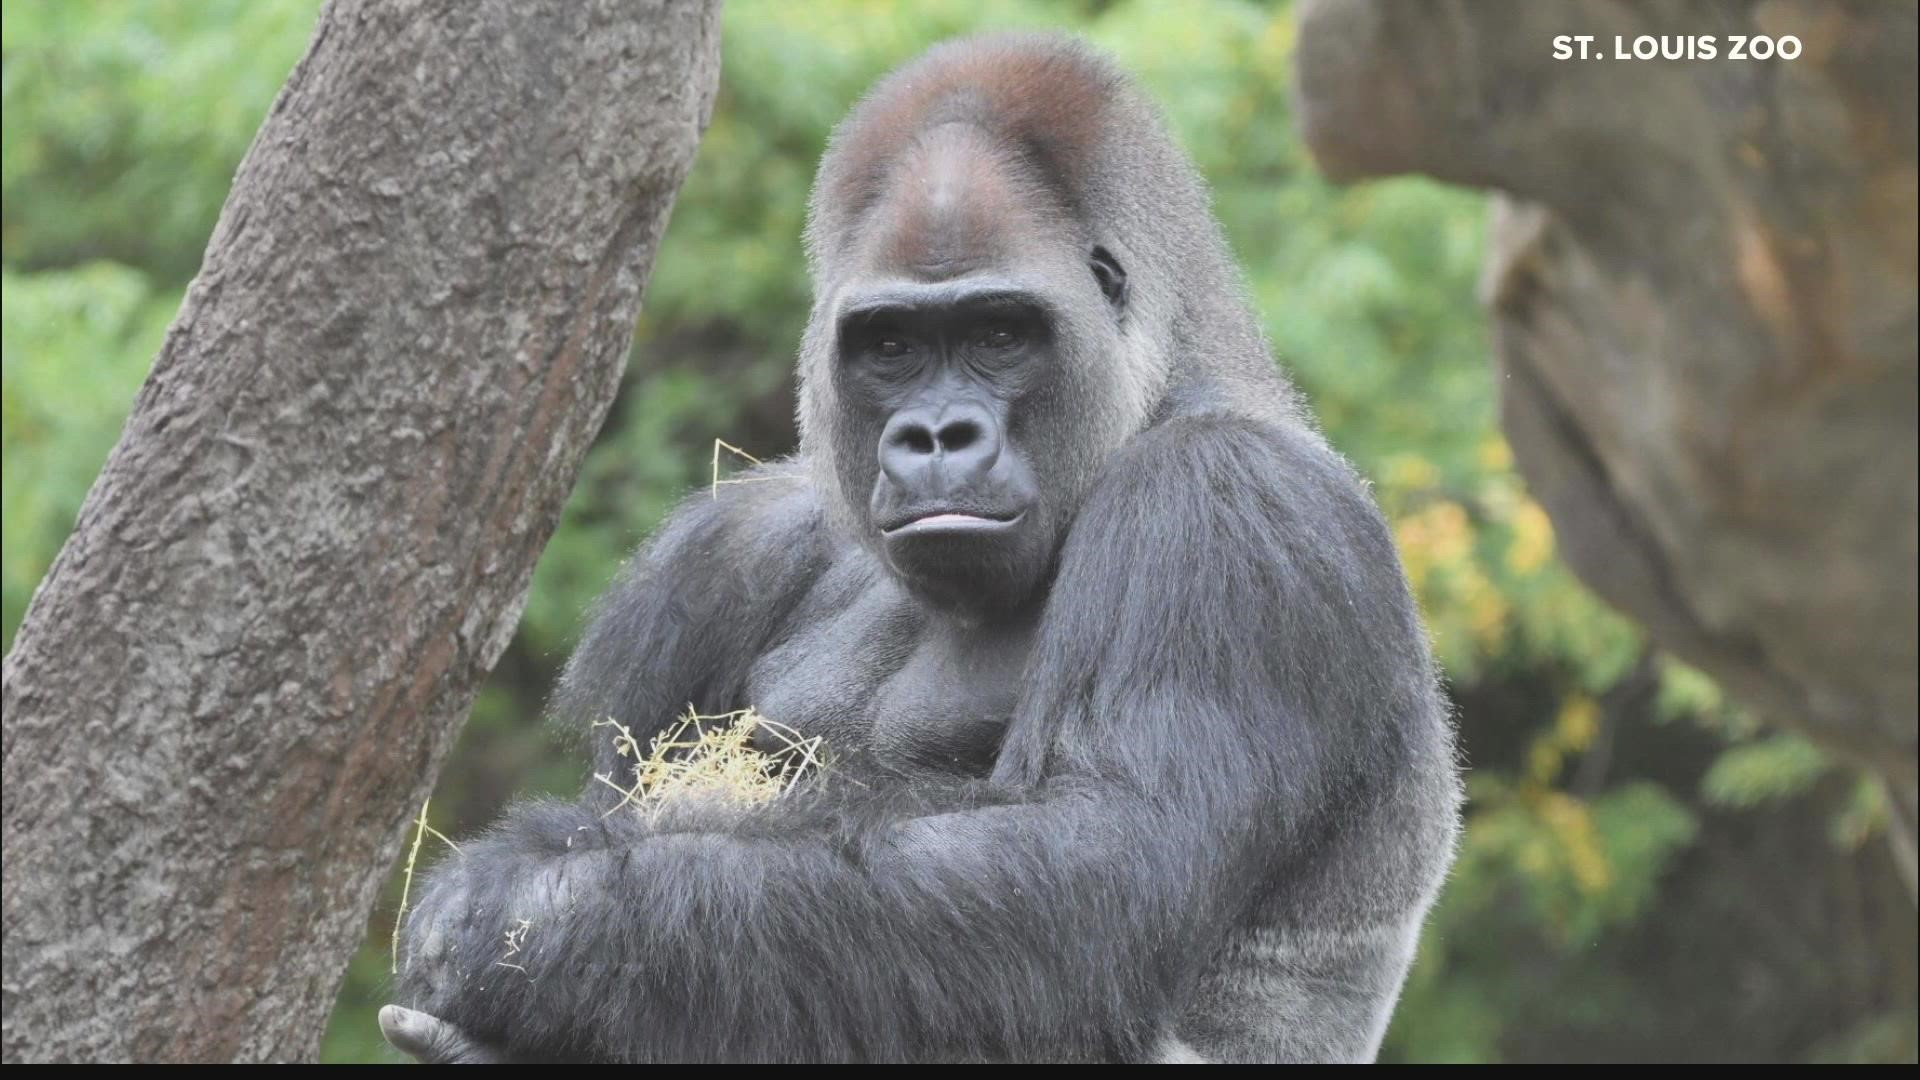 The Saint Louis Zoo is saying goodbye to a gorilla named Nadaya. The 22-year-old silverback was just moved to the Woodland Park Zoo in Seattle.